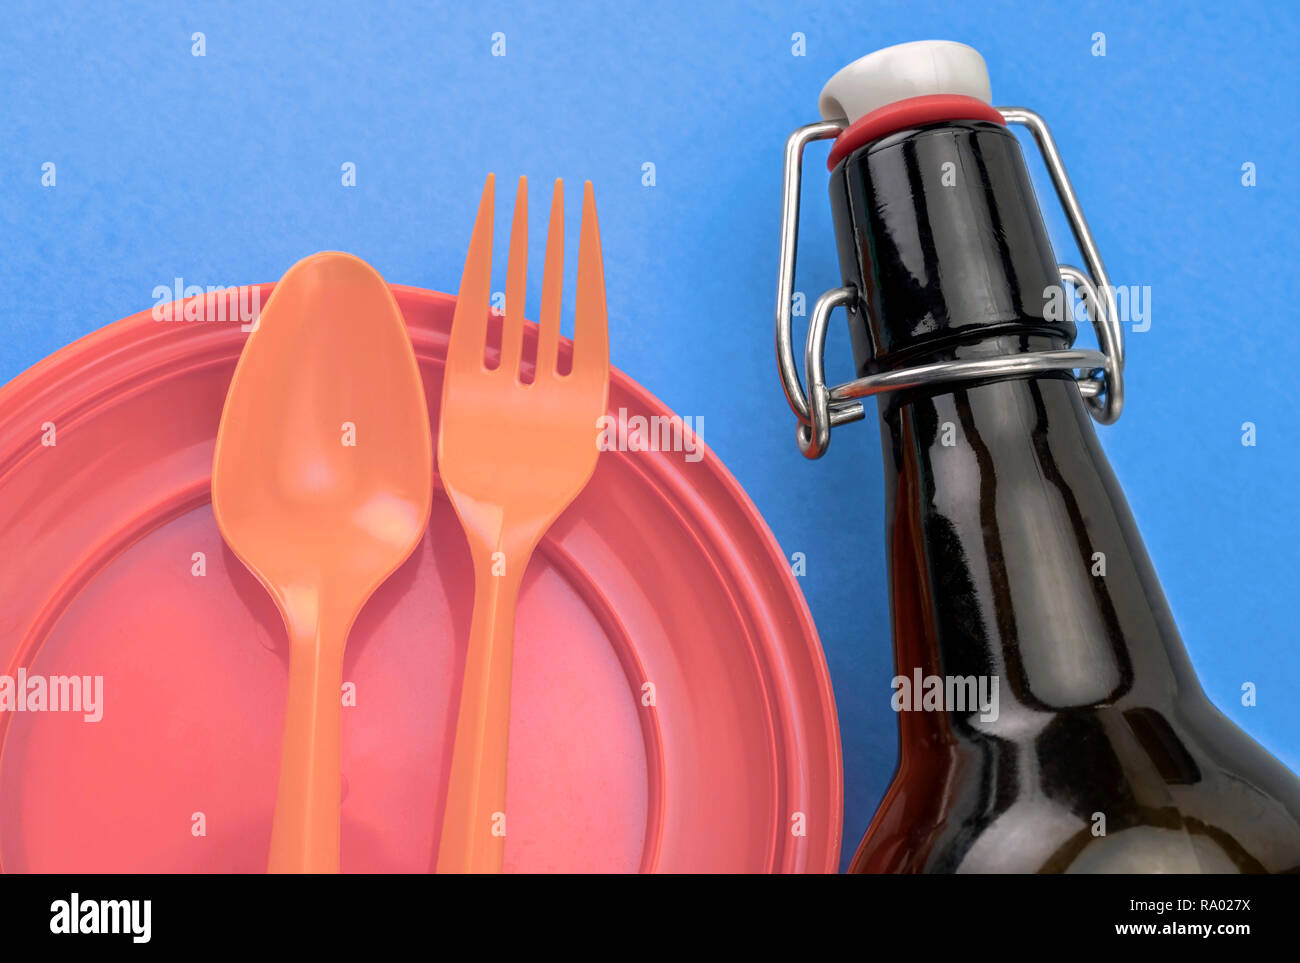 Orange dish and plastic cutlery next to a glass bottle, conceptual image Stock Photo